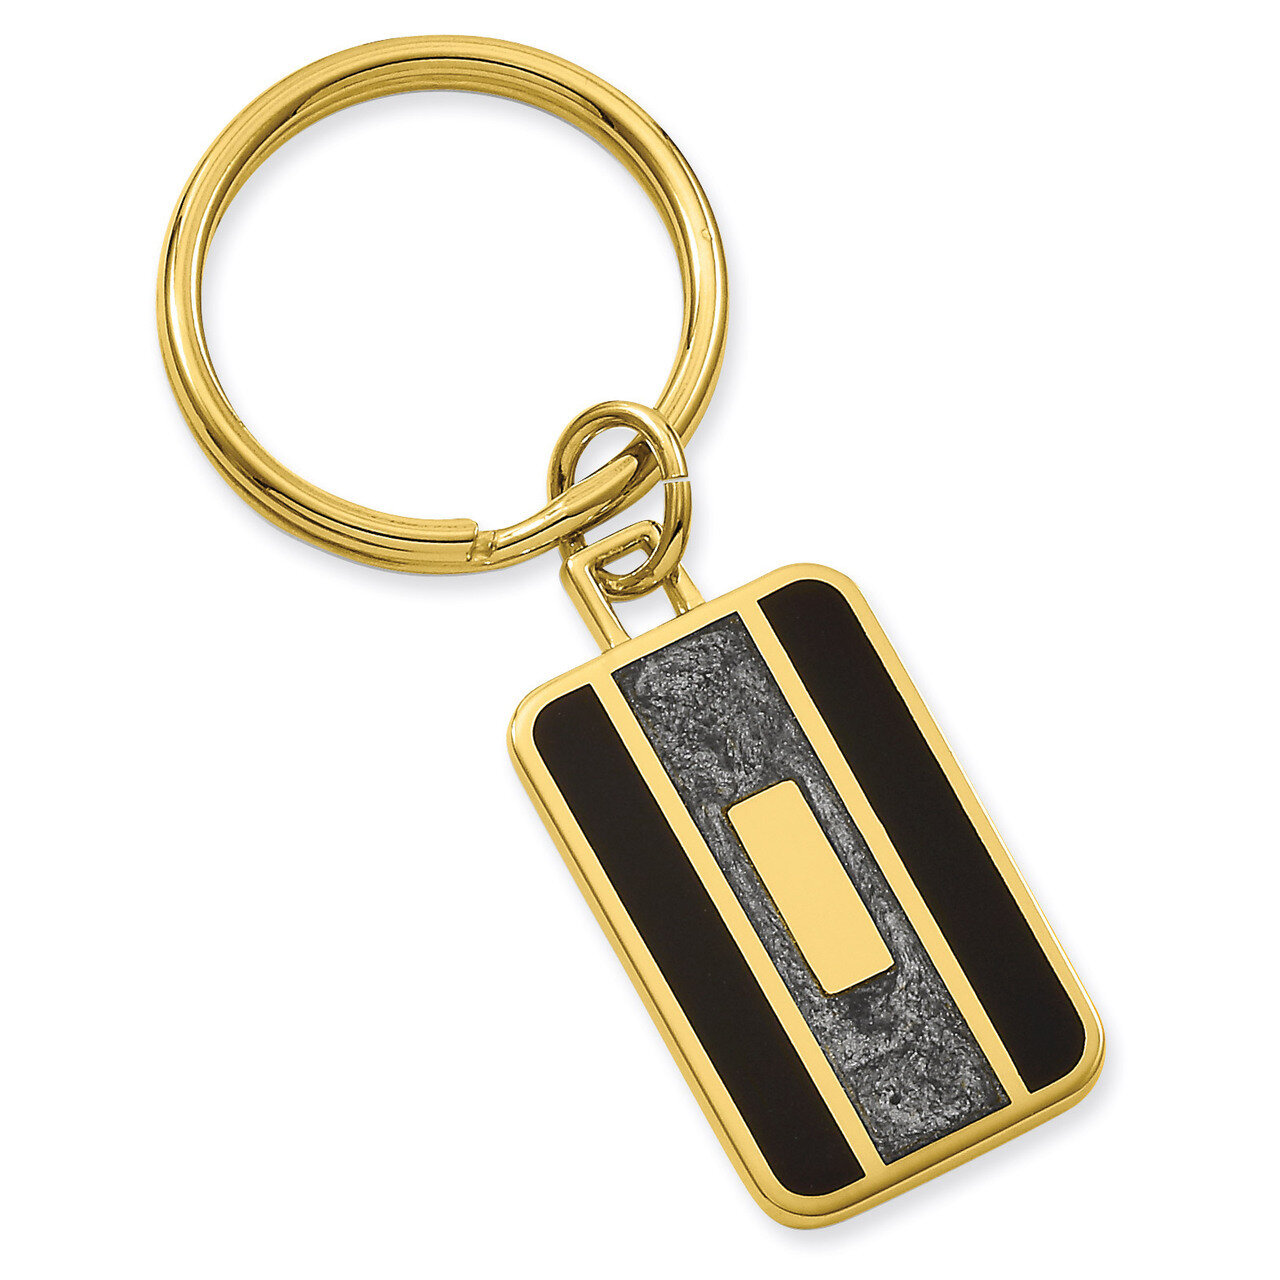 Black & Grey Colored Key Ring Gold-plated GL8723